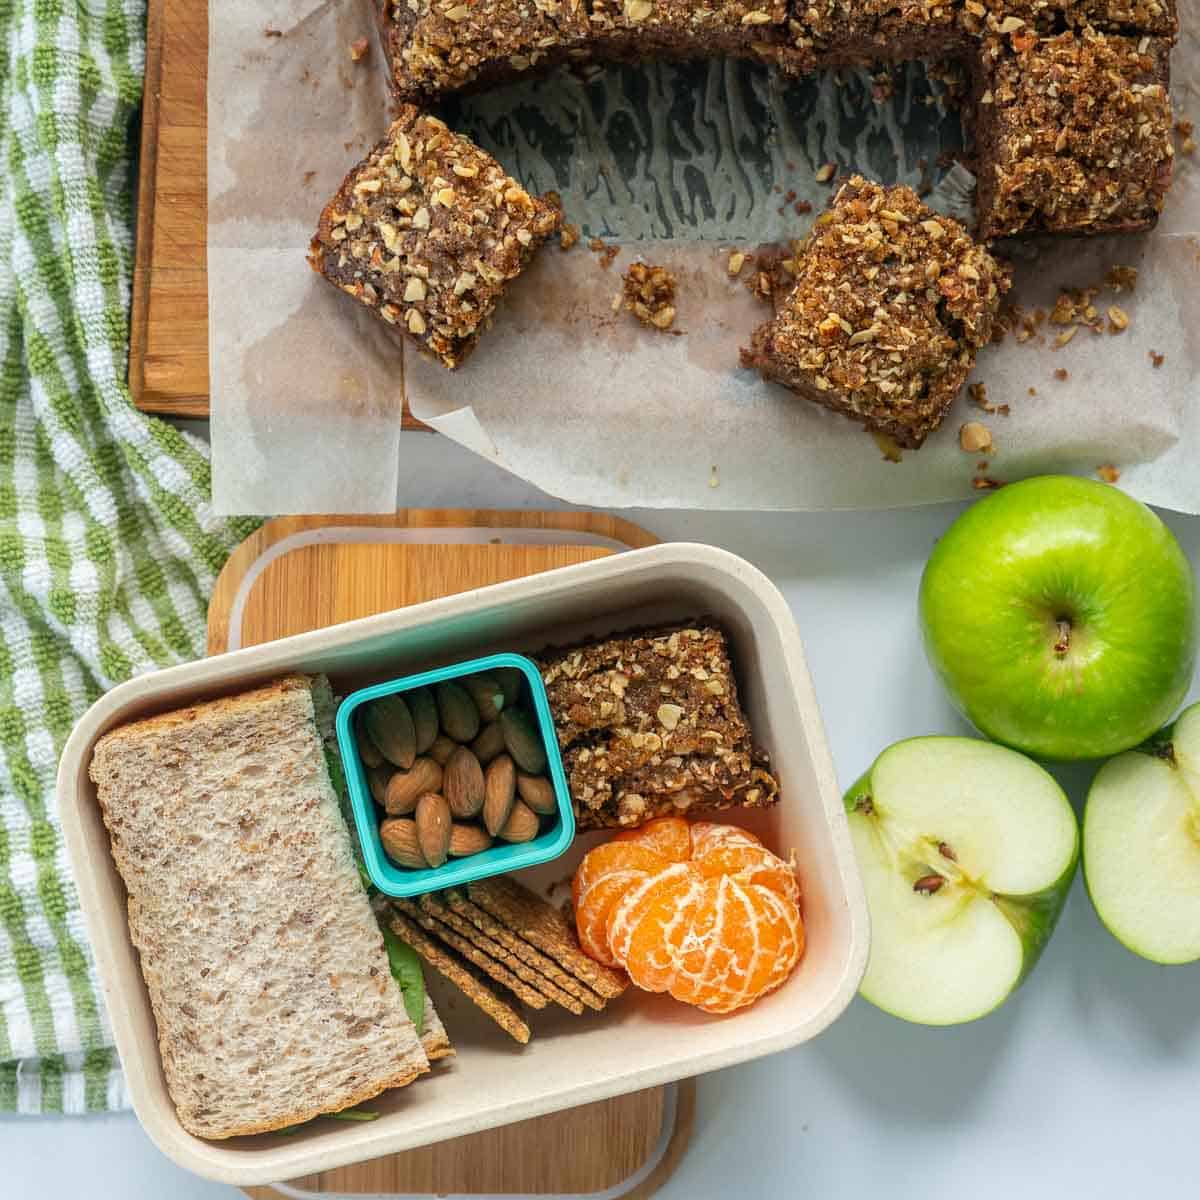 A lunchbox packed with a piece of apple cake, fruit, nuts, crackers and a sandwich.